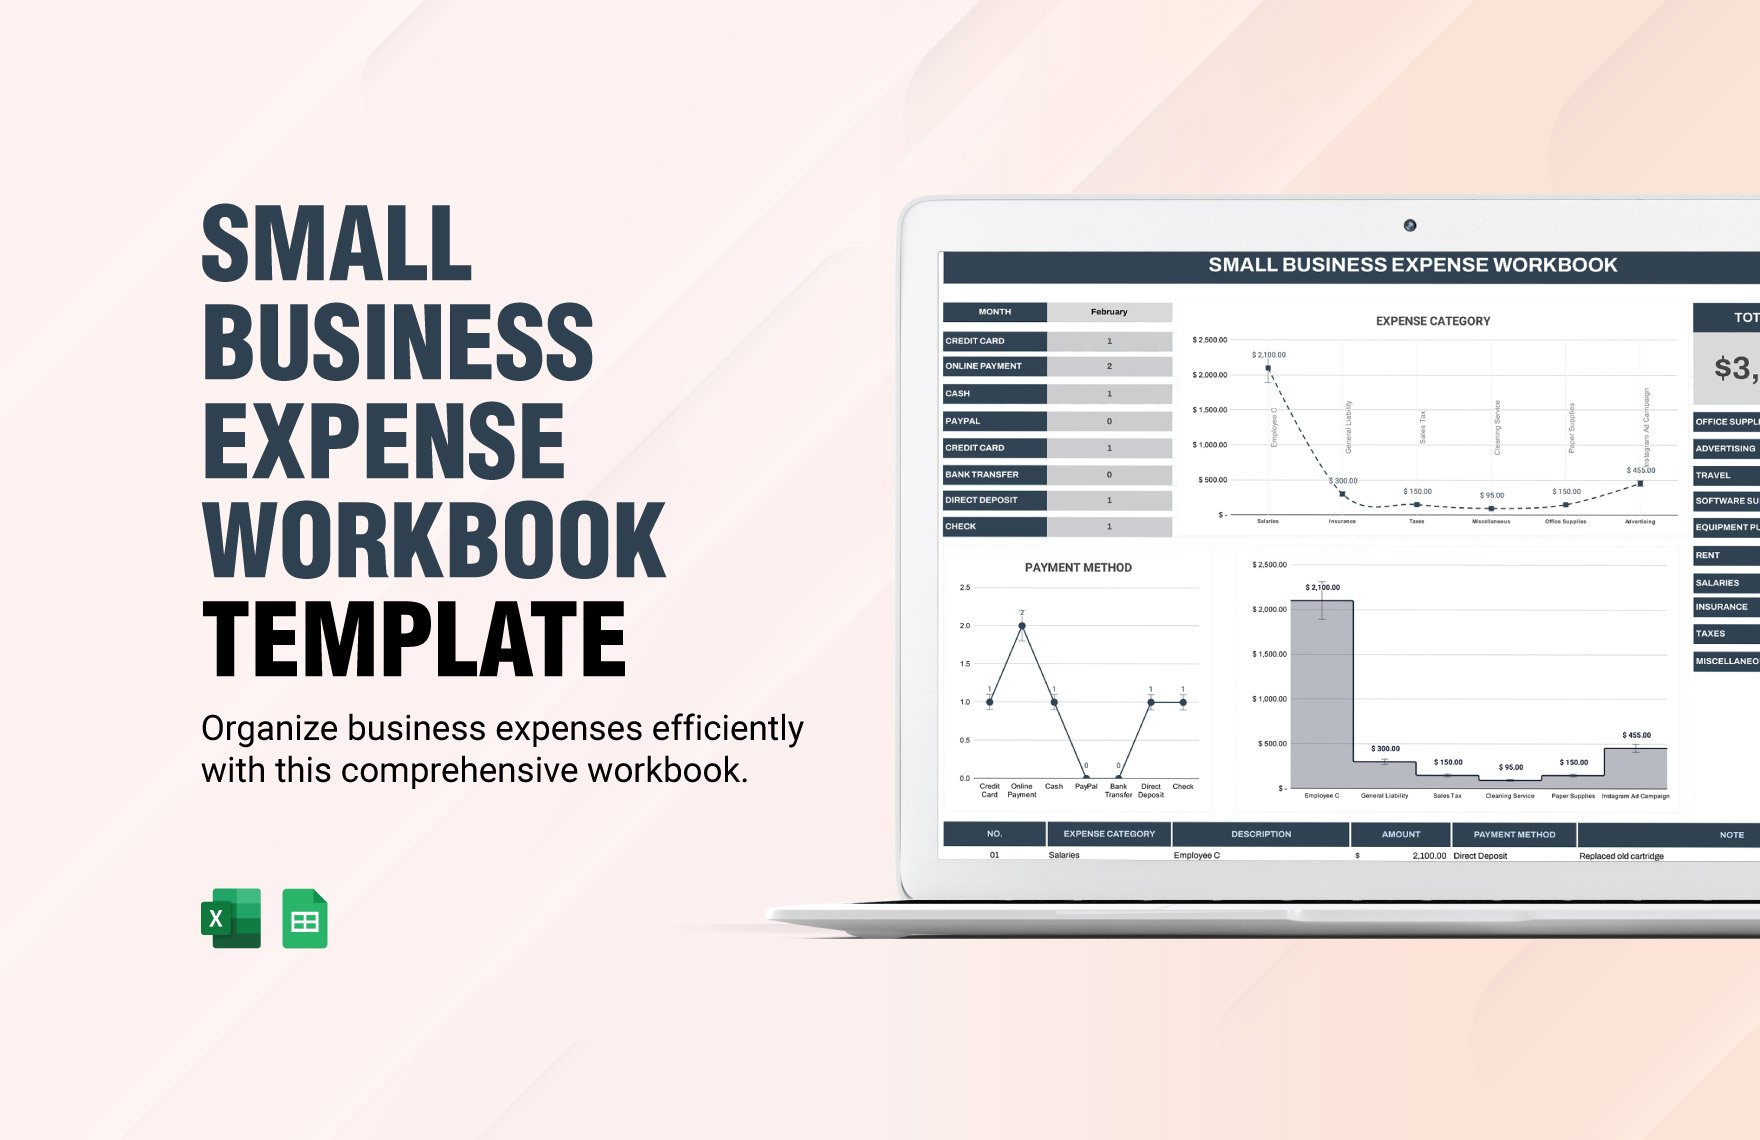 Small Business Expense Workbook Template in Excel, Google Sheets